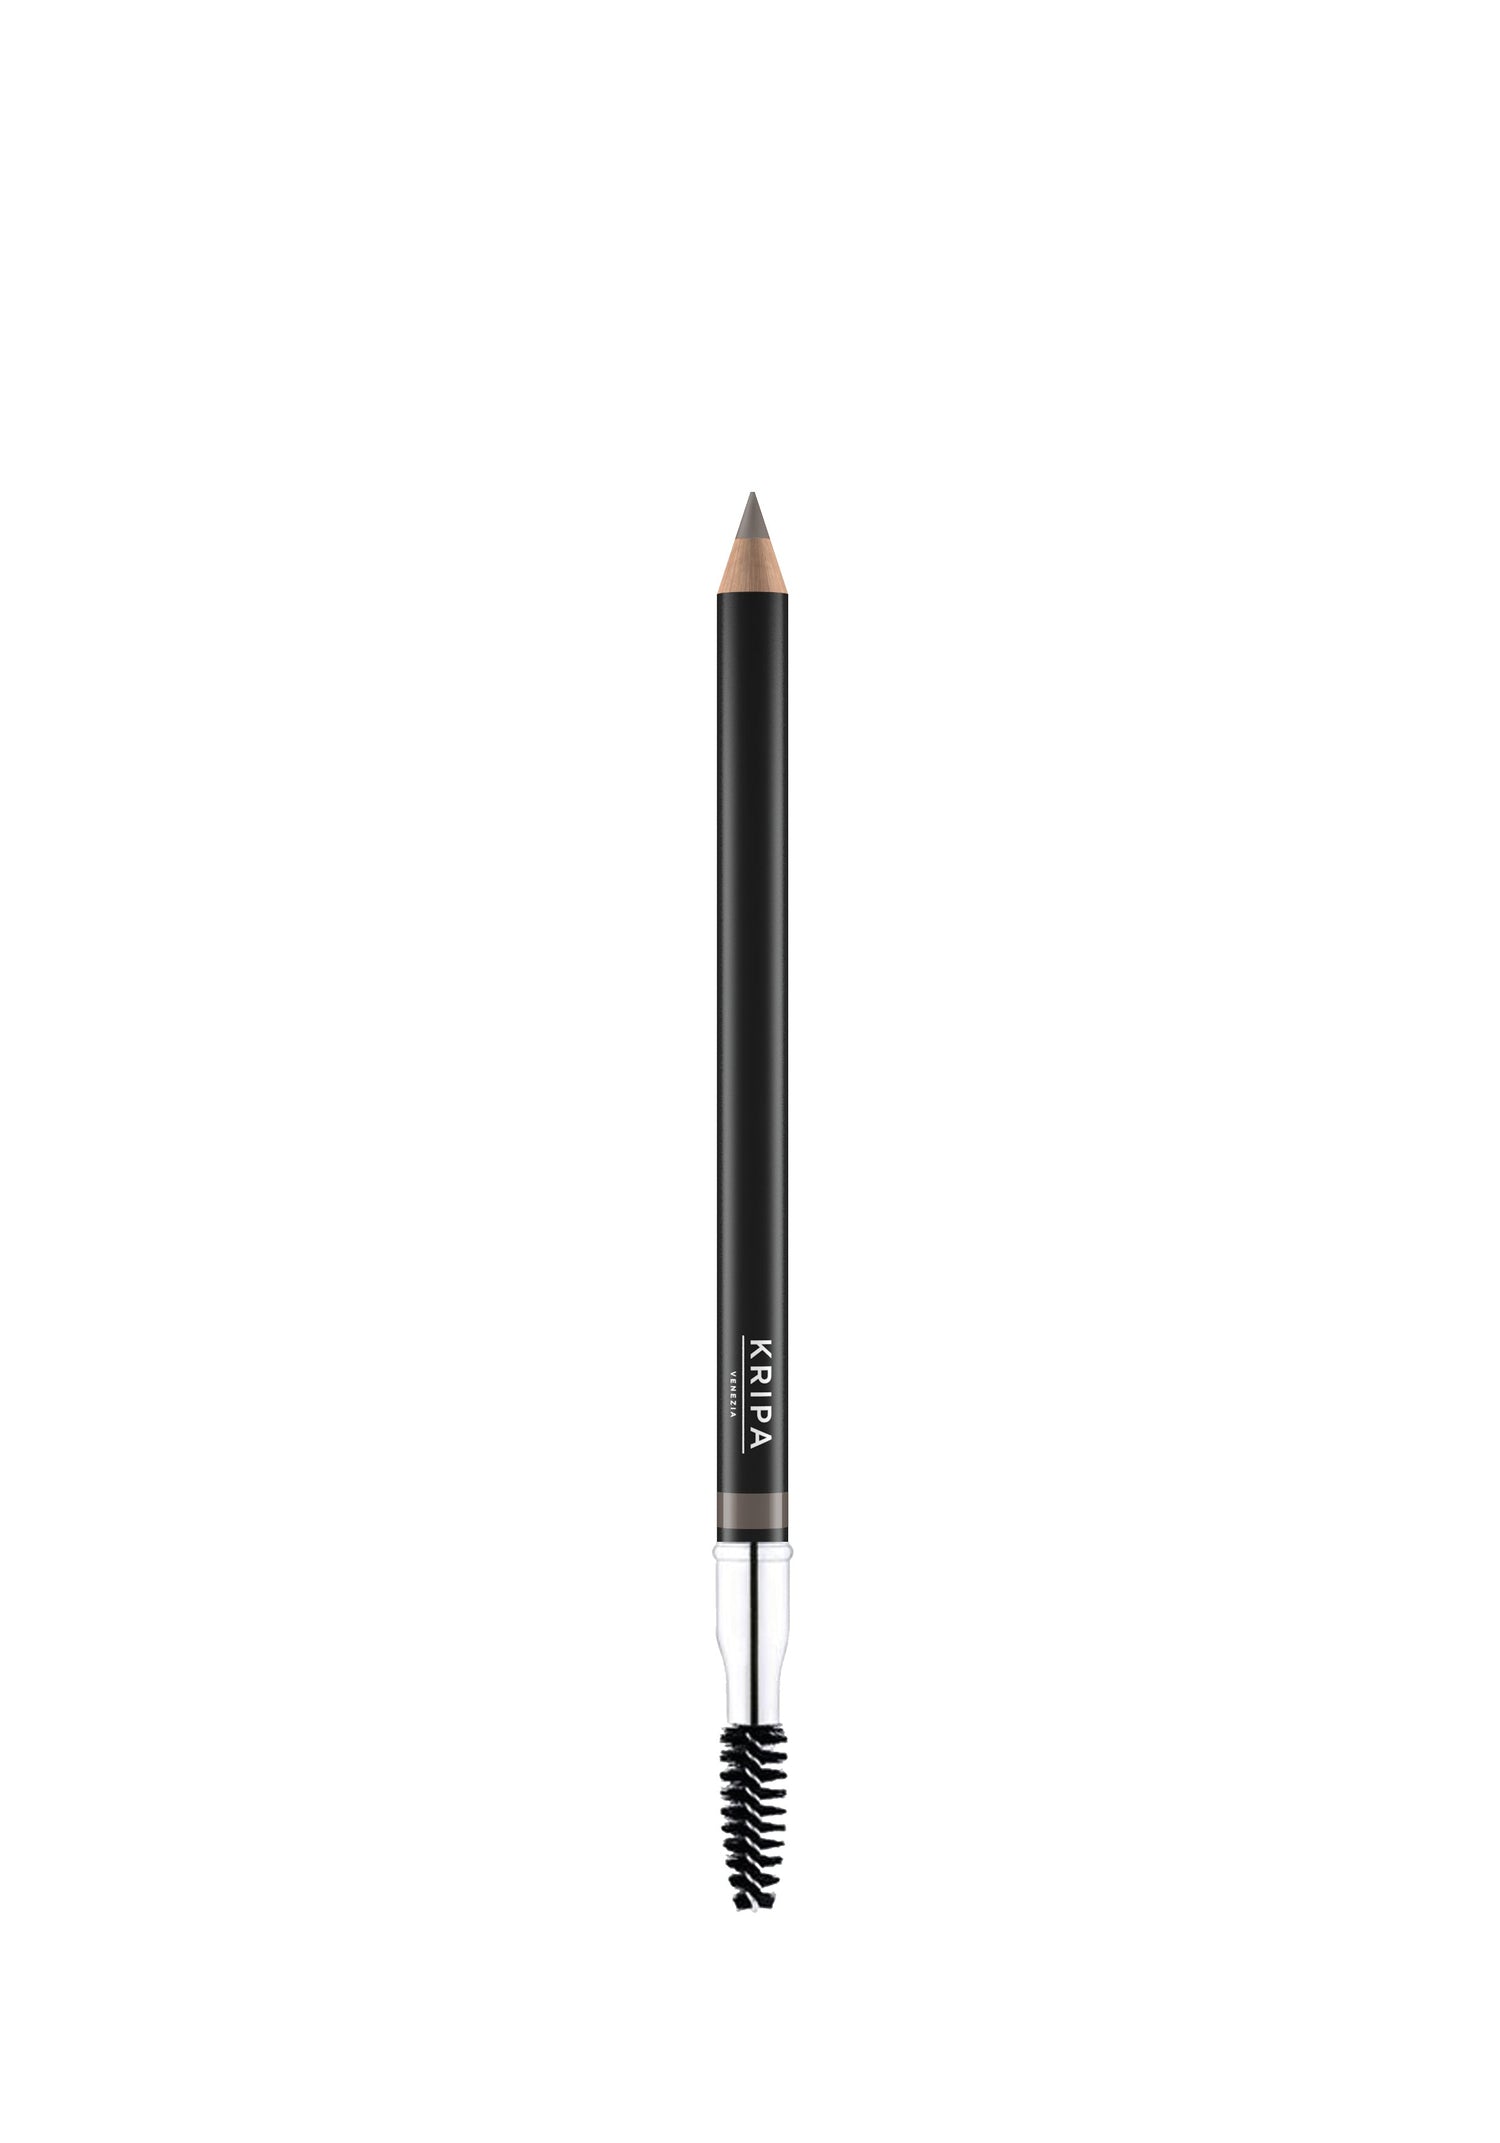 Kripa Cosmetics Australia Brow Pencil Brow Pencil Natural Brow Pencil for Perfectly Defined Brows